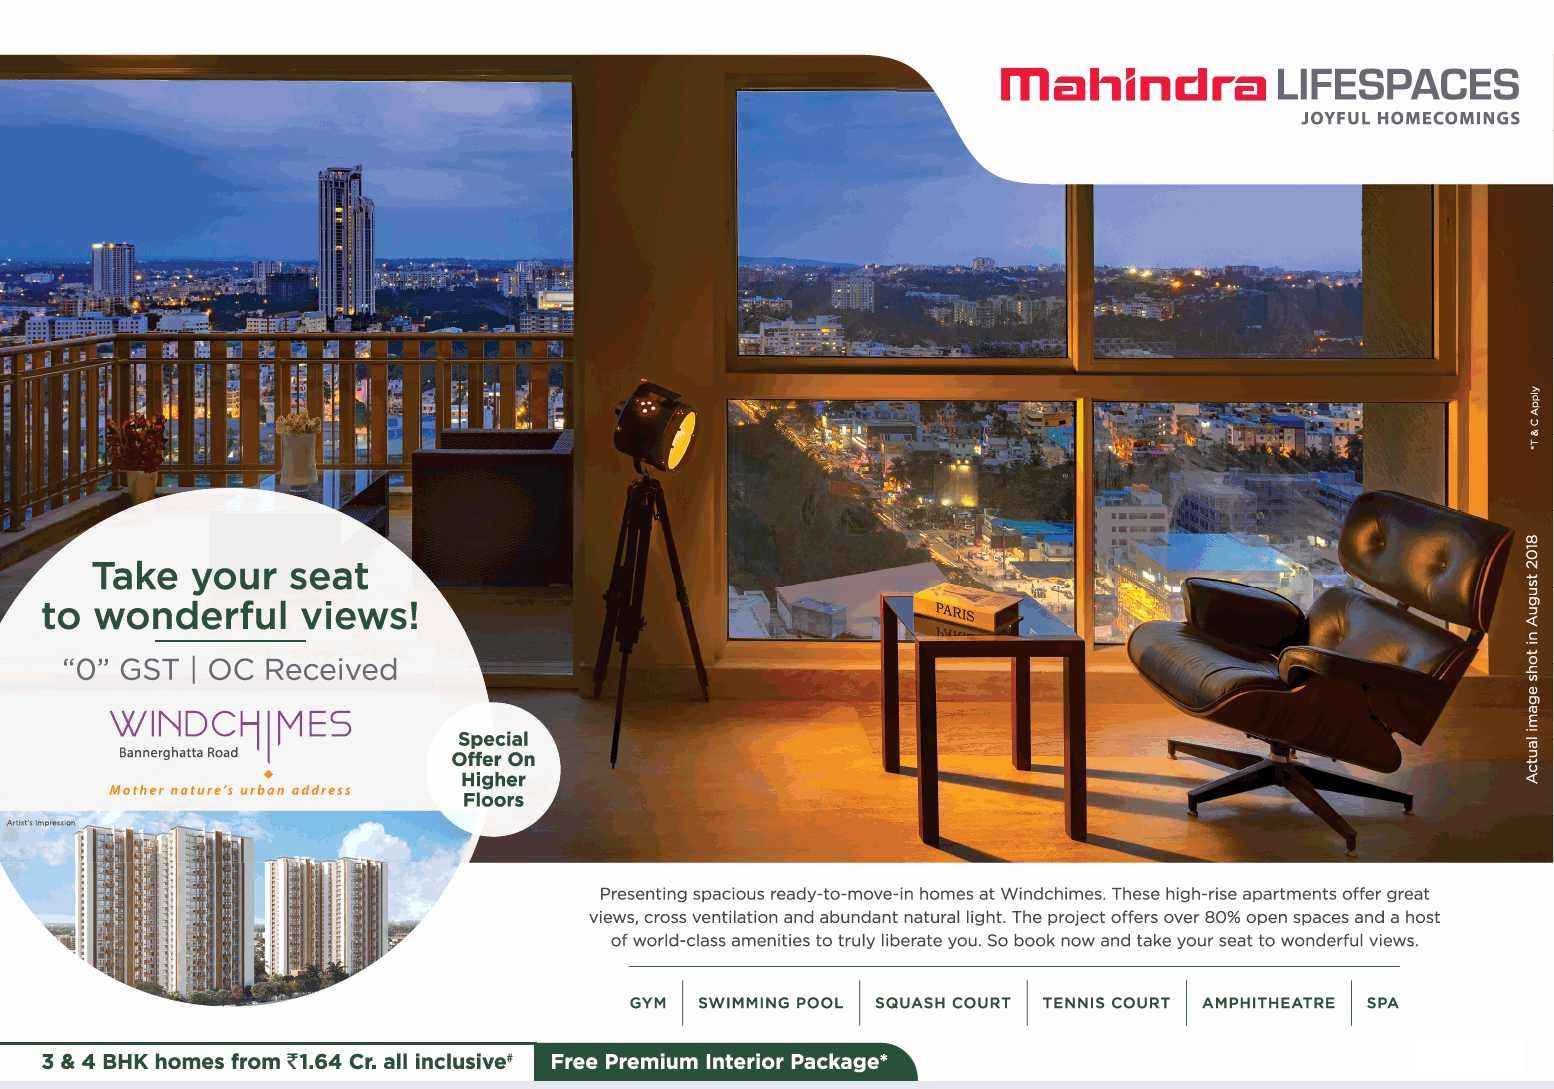 Presenting spacious ready to move in homes at Mahindra Windchimes in Bangalore